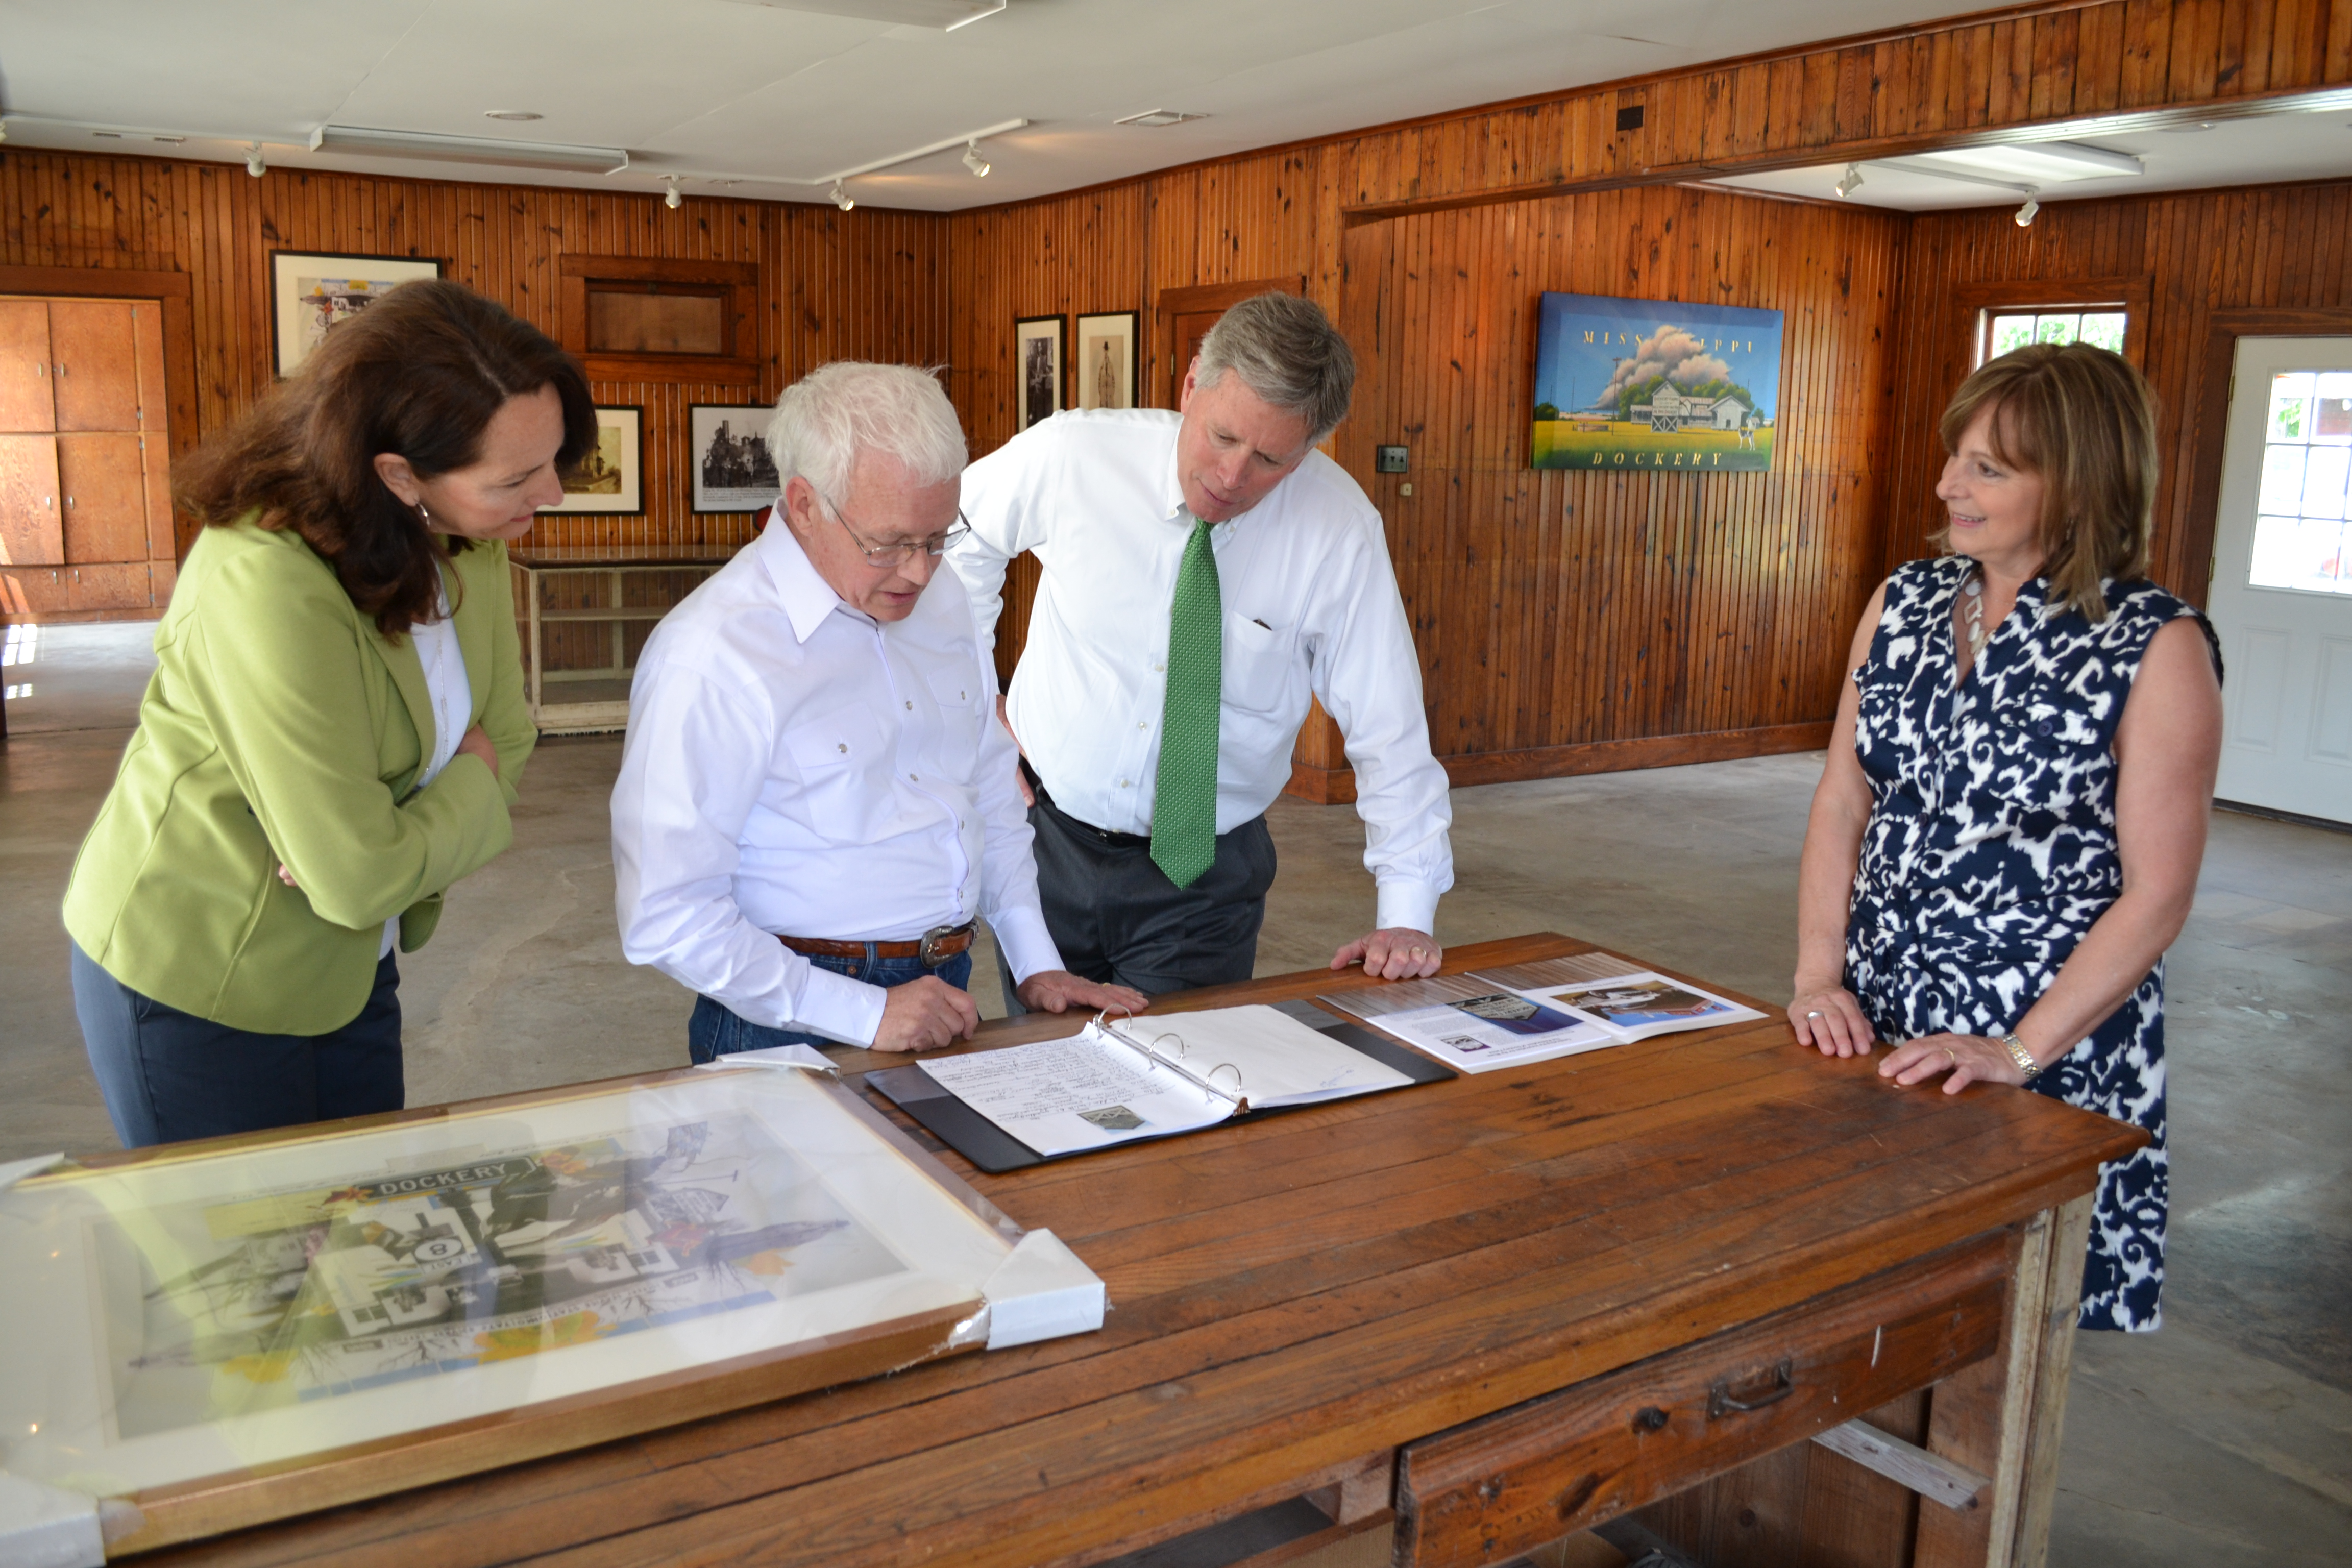 From left, First Lady Nancy LaForge, Delta State Professor Emeritus of Art and Coordinator for the Dockery Farms Foundation Bill Lester, President William N. LaForge and Tennie Lester examine the sign-in book with names of visitors from all over the world who have visited Dockery Farms.